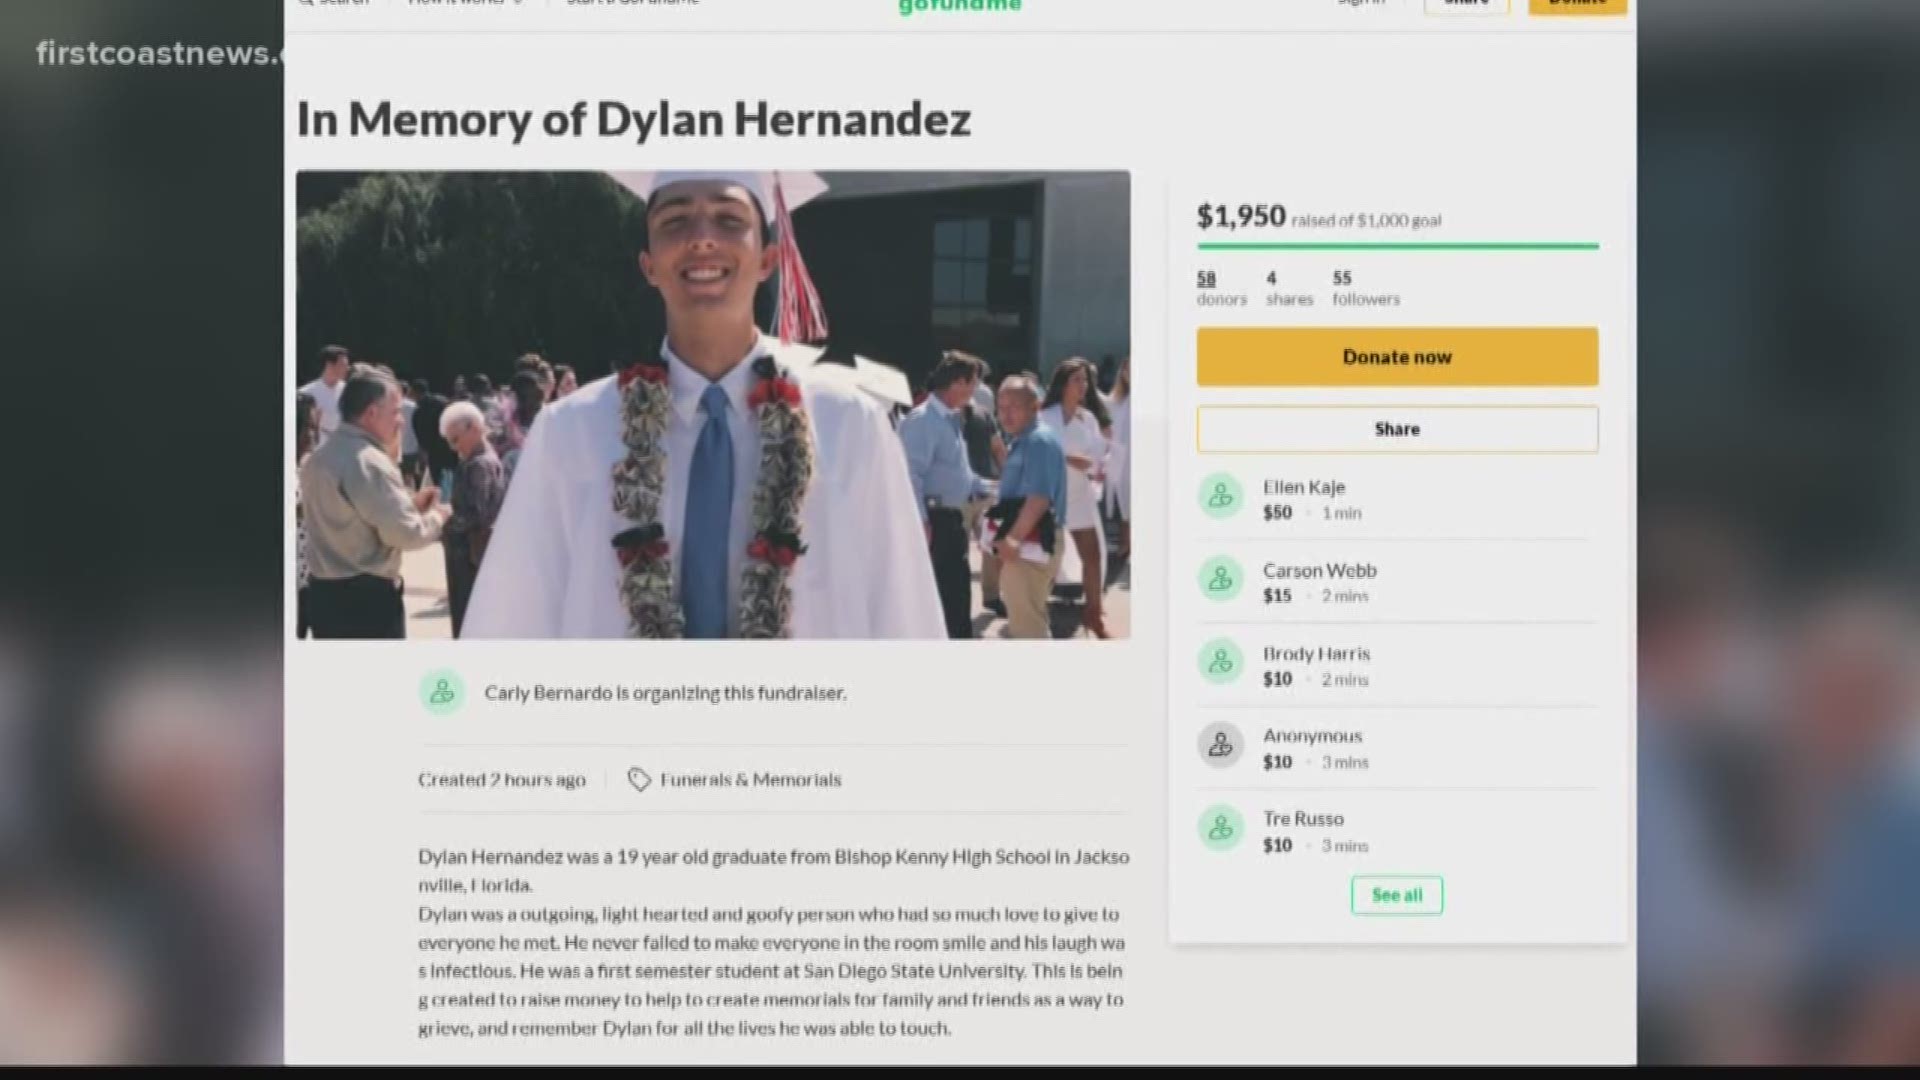 A Bishop Kenny High School graduate died at San Diego State University after falling from a bunk bed upon returning from a fraternity party, according to a report.